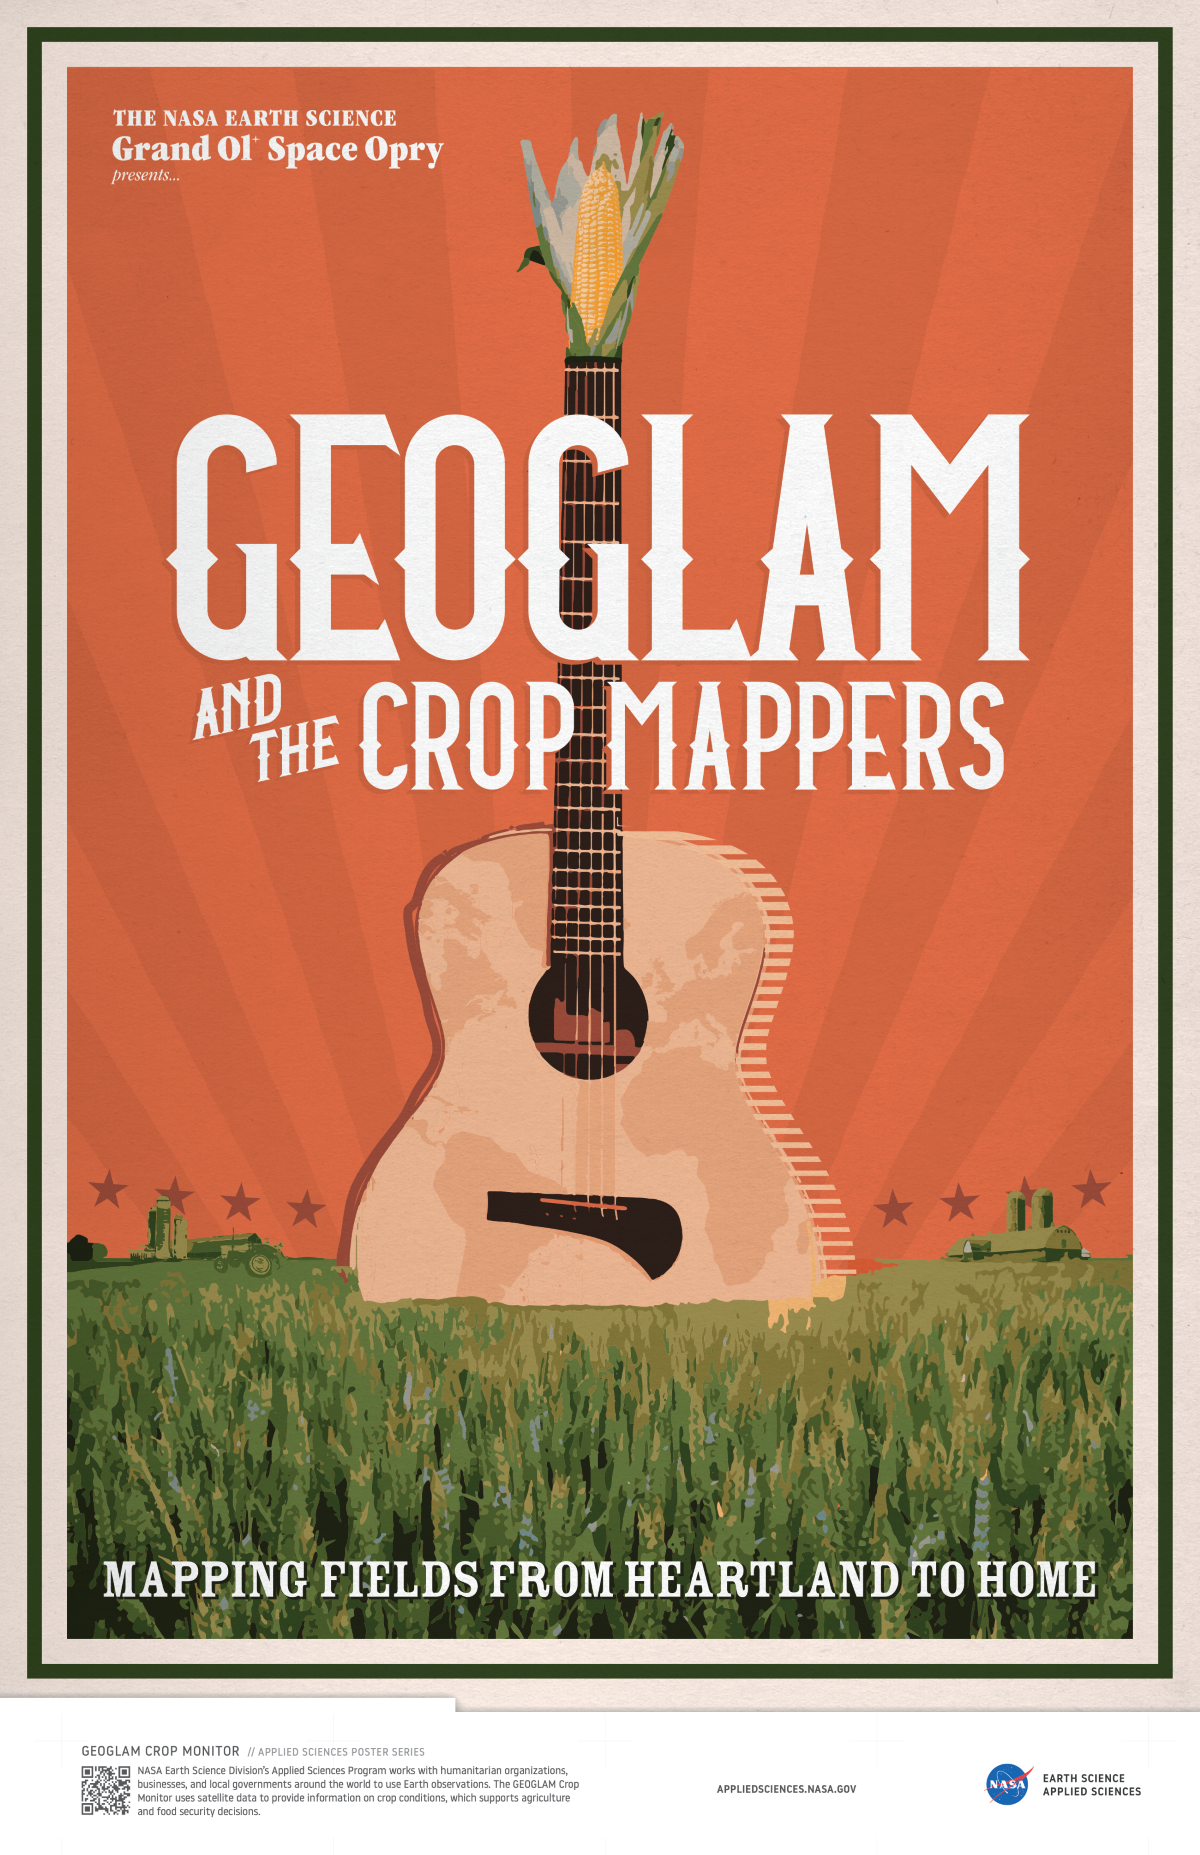 Illustrated guitar in the middle of a grain field. On top are the words GeoGlam and the Crop Mappers, Mapping fields from heartland to home.